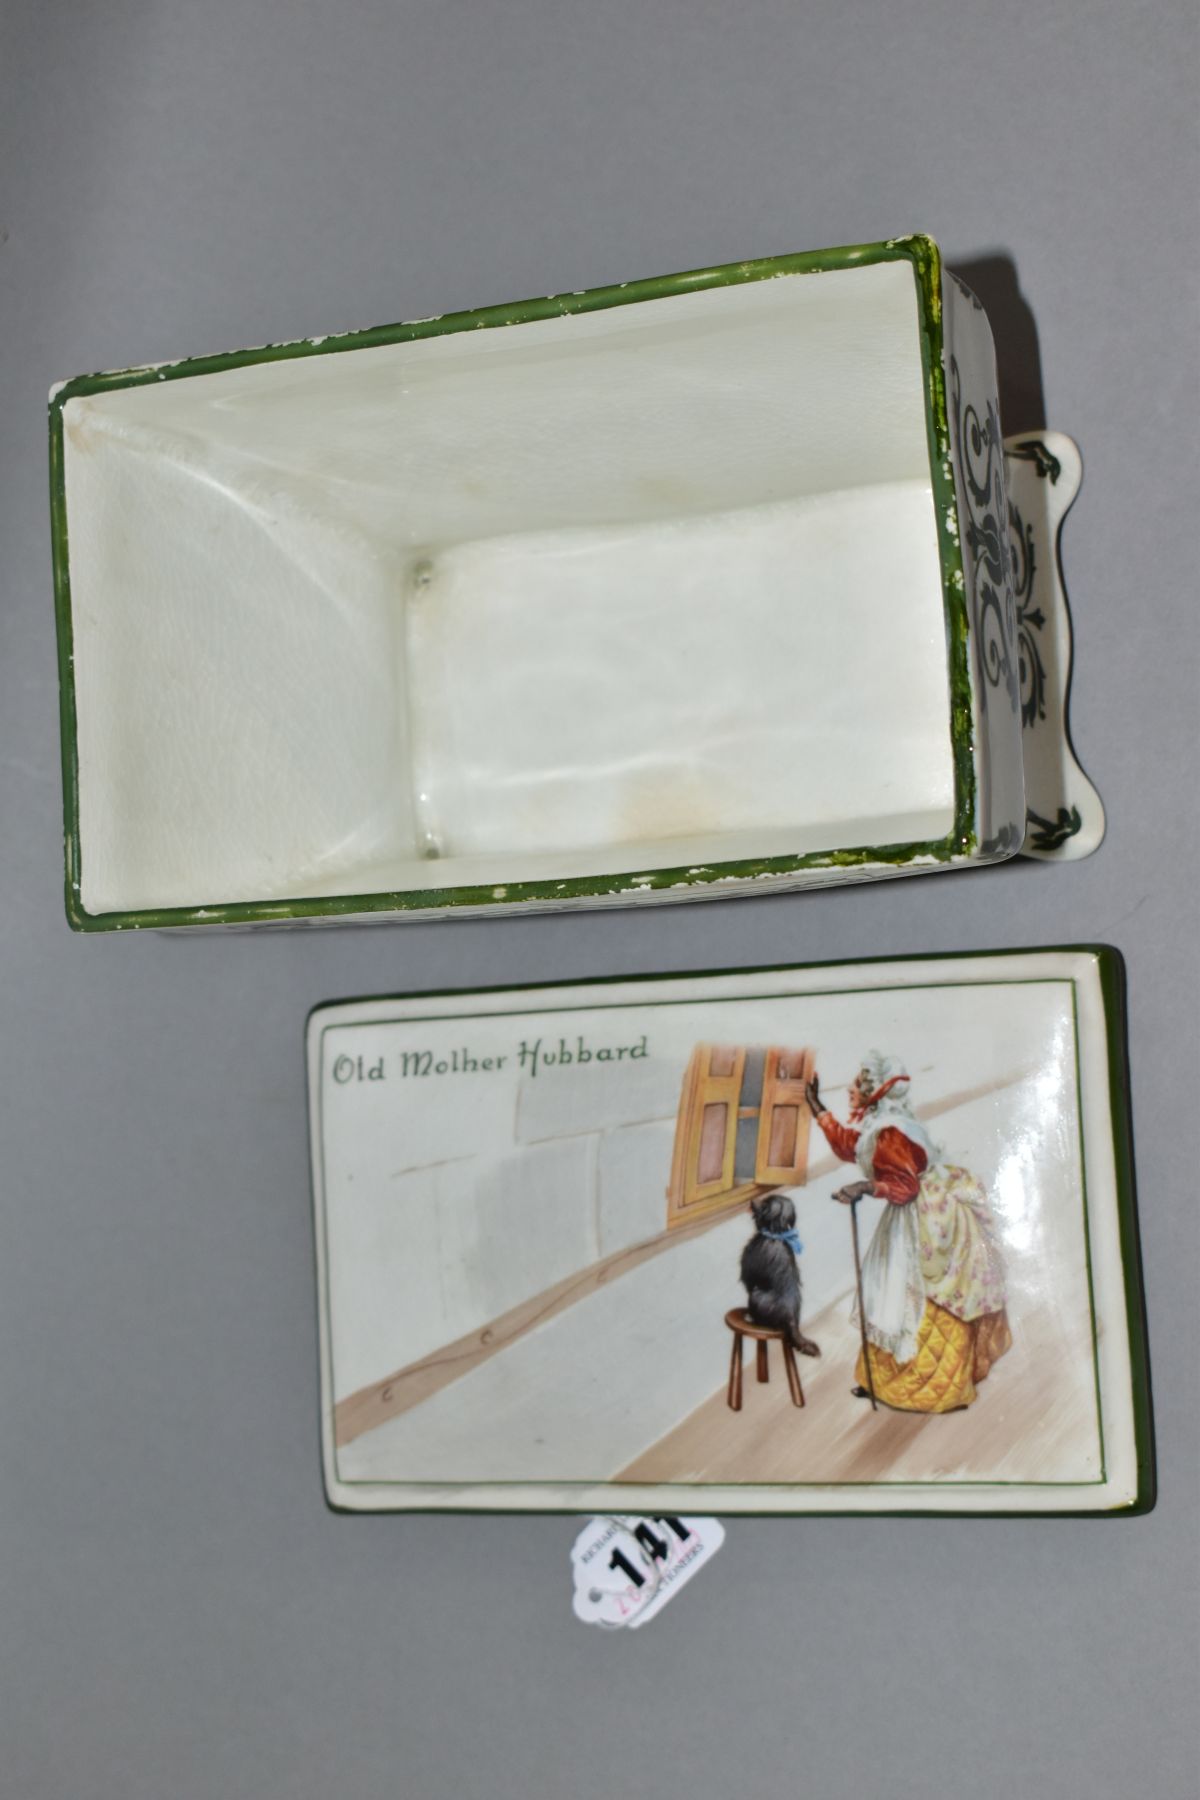 A ROYAL DOULTON NURSERY RHYMES 'A' SERIES WARE HUNTLEY & PALMERS BISCUIT CASKET IN THE FORM OF A - Image 5 of 7